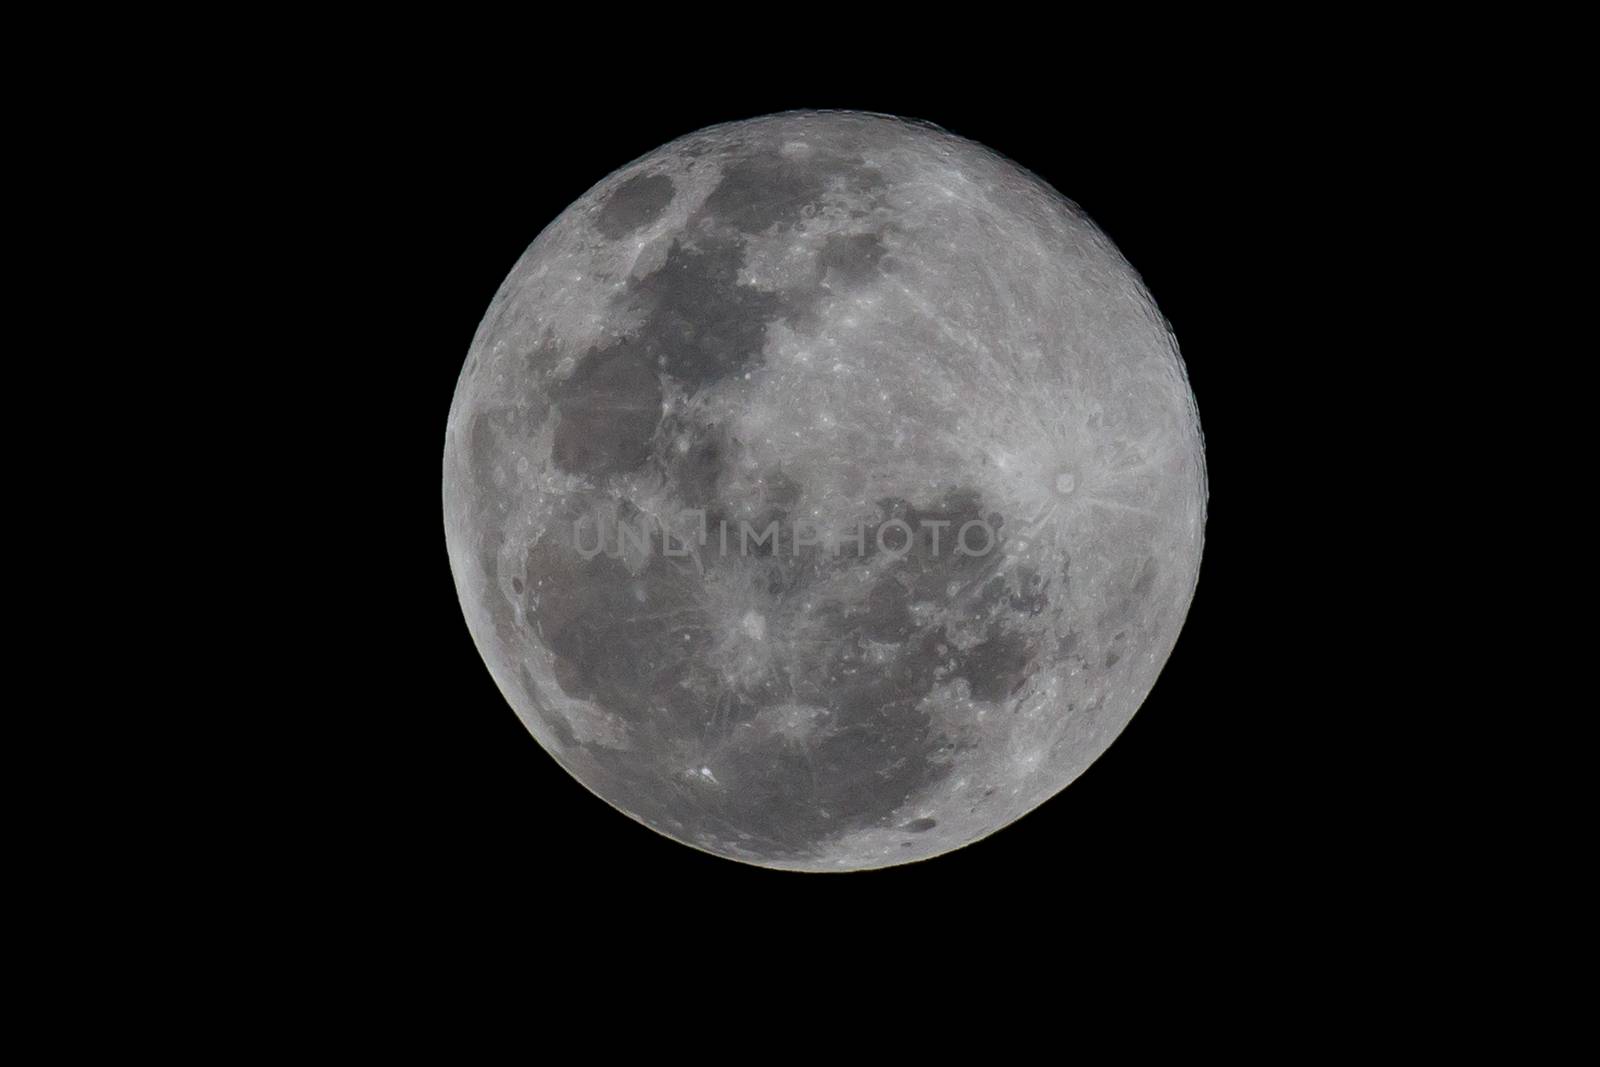 Full moon as seen from South Africa on 31 August 2015 making it a blue moon